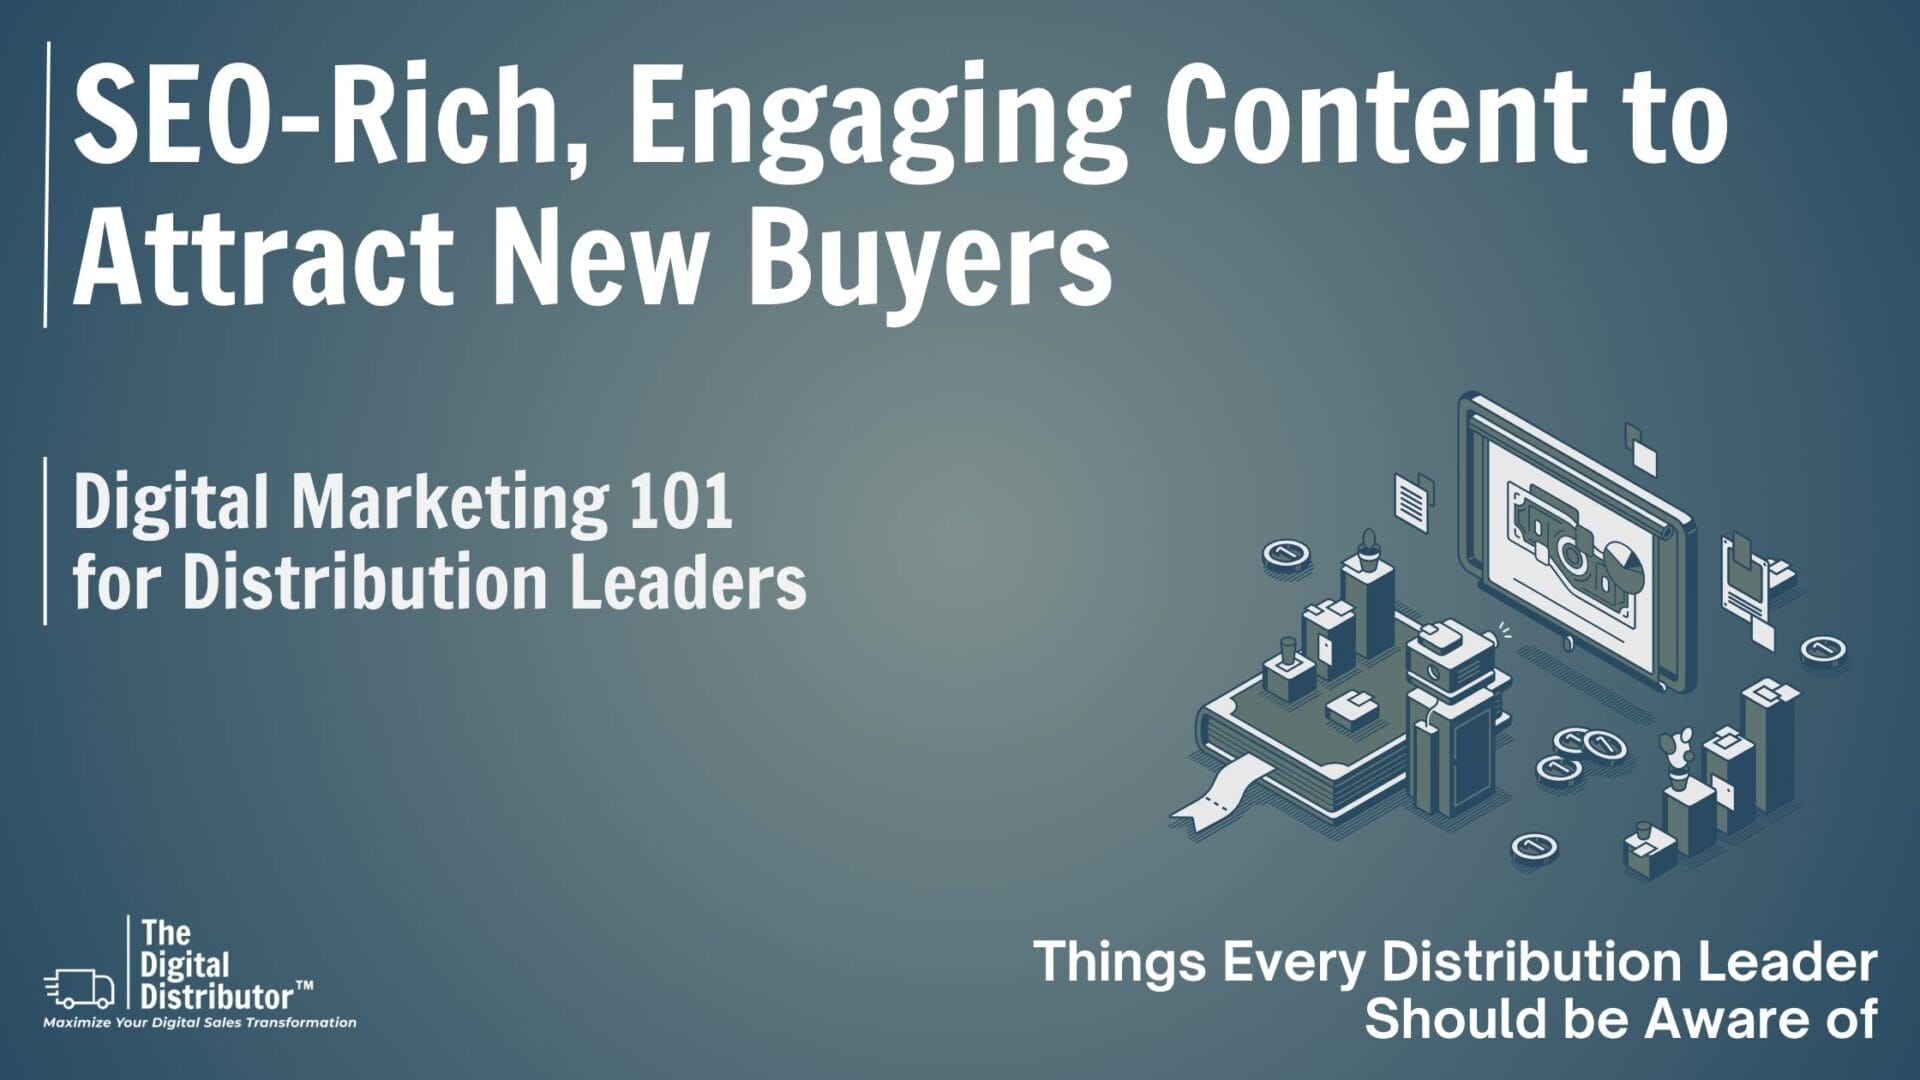 SEO-Rich, Engaging Content to Attract New Buyers